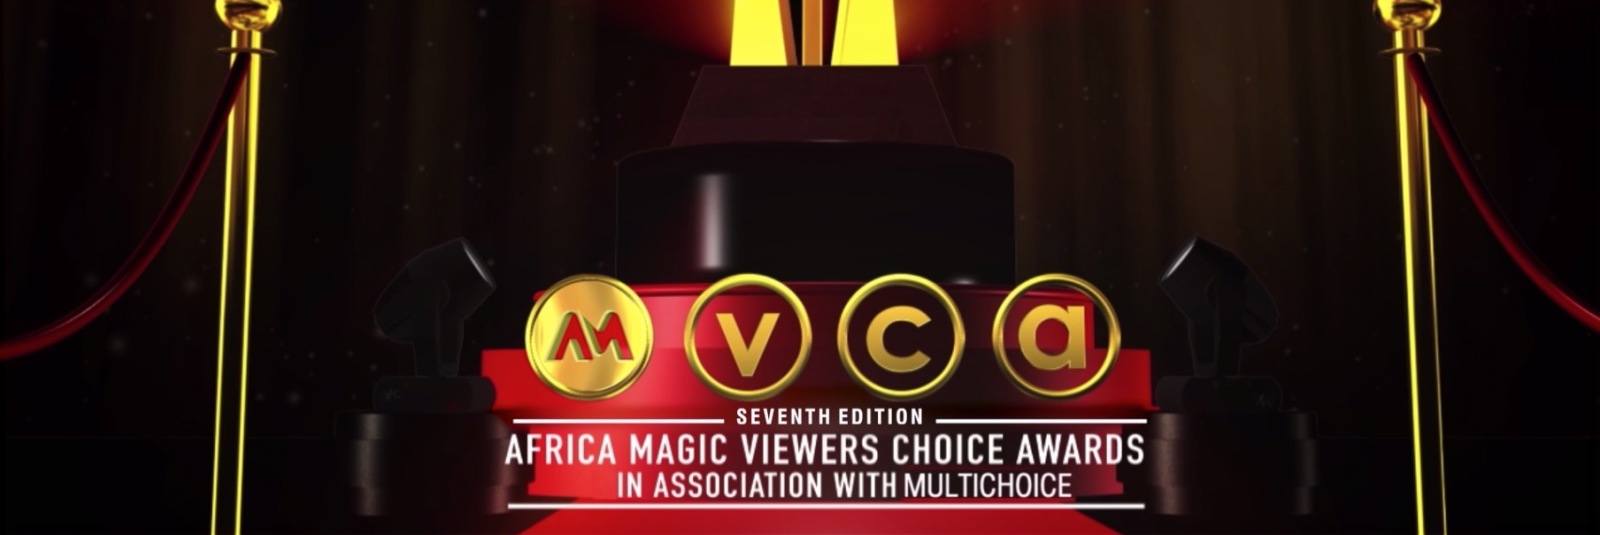 AMVCA7 Vote: How to vote for your favorite nominees in AMVCA 2018 awards